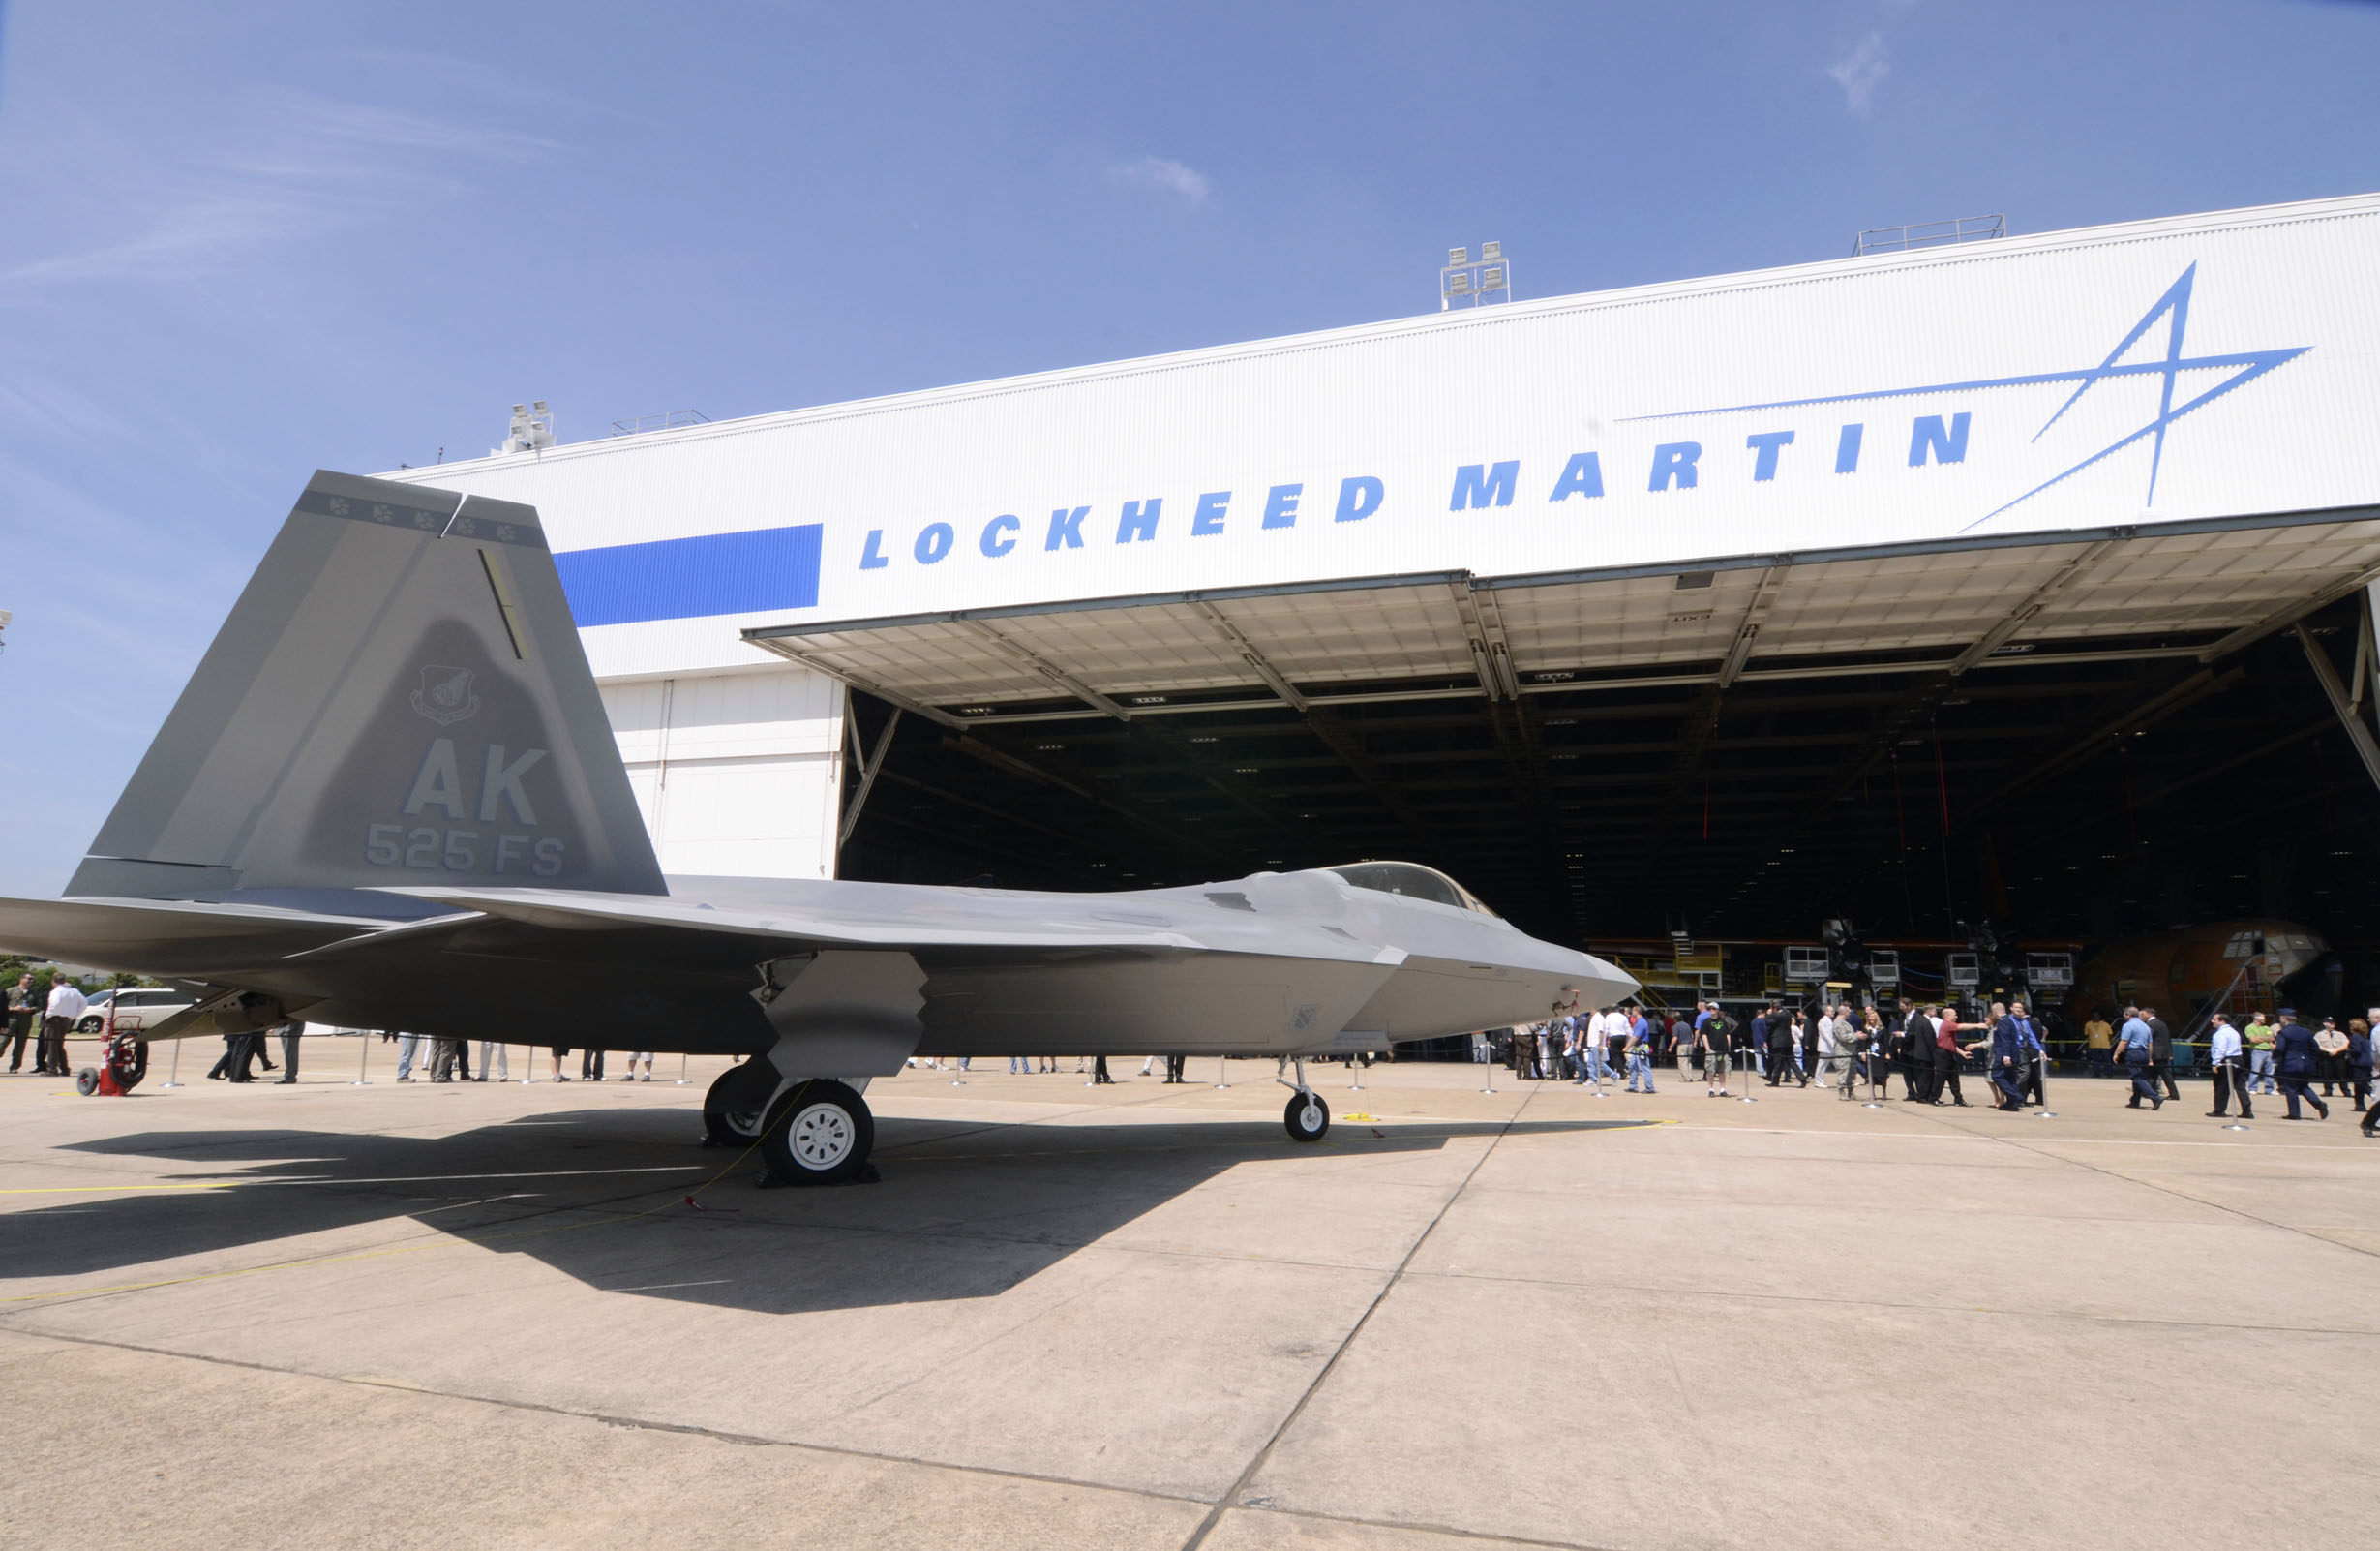 A crowd that included Air Force leadership, congressional representatives and senators, executives and plant personnel from the Lockheed Martin Aeronautics Corporation attended a ceremony dedicating the delivery of the final F-22 Raptor in Marietta, Ga., May 2. (U.S. Air Force photo/Don Peek)